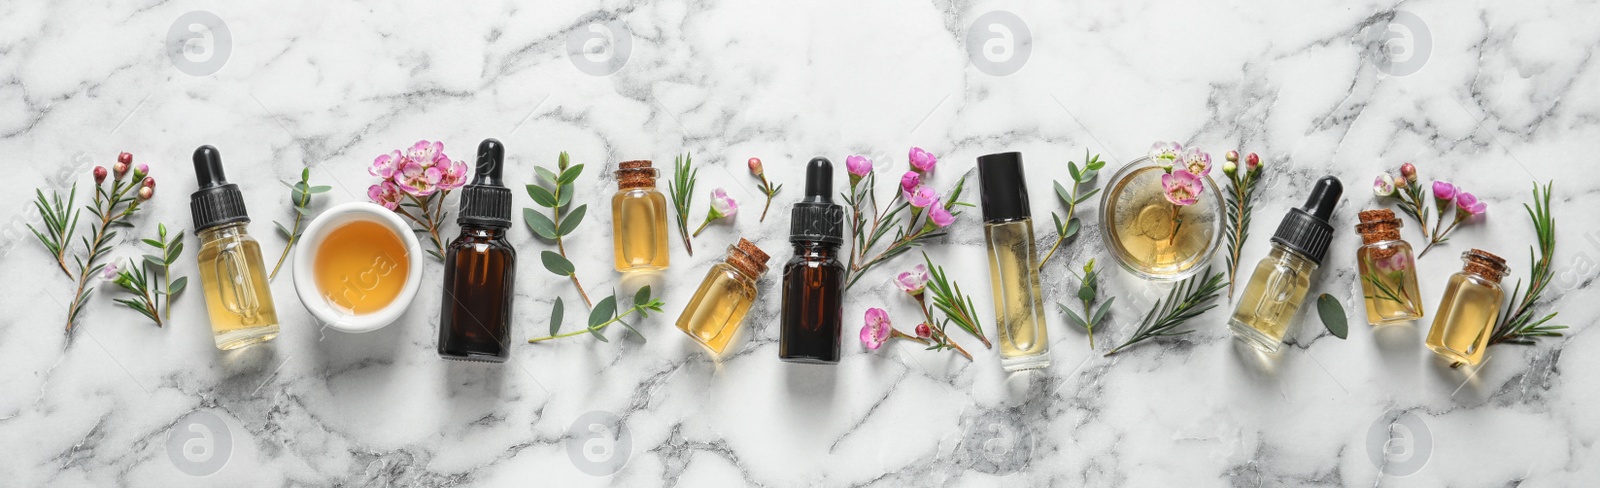 Photo of Flat lay composition with bottles of natural tea tree oil and space for text on white marble background